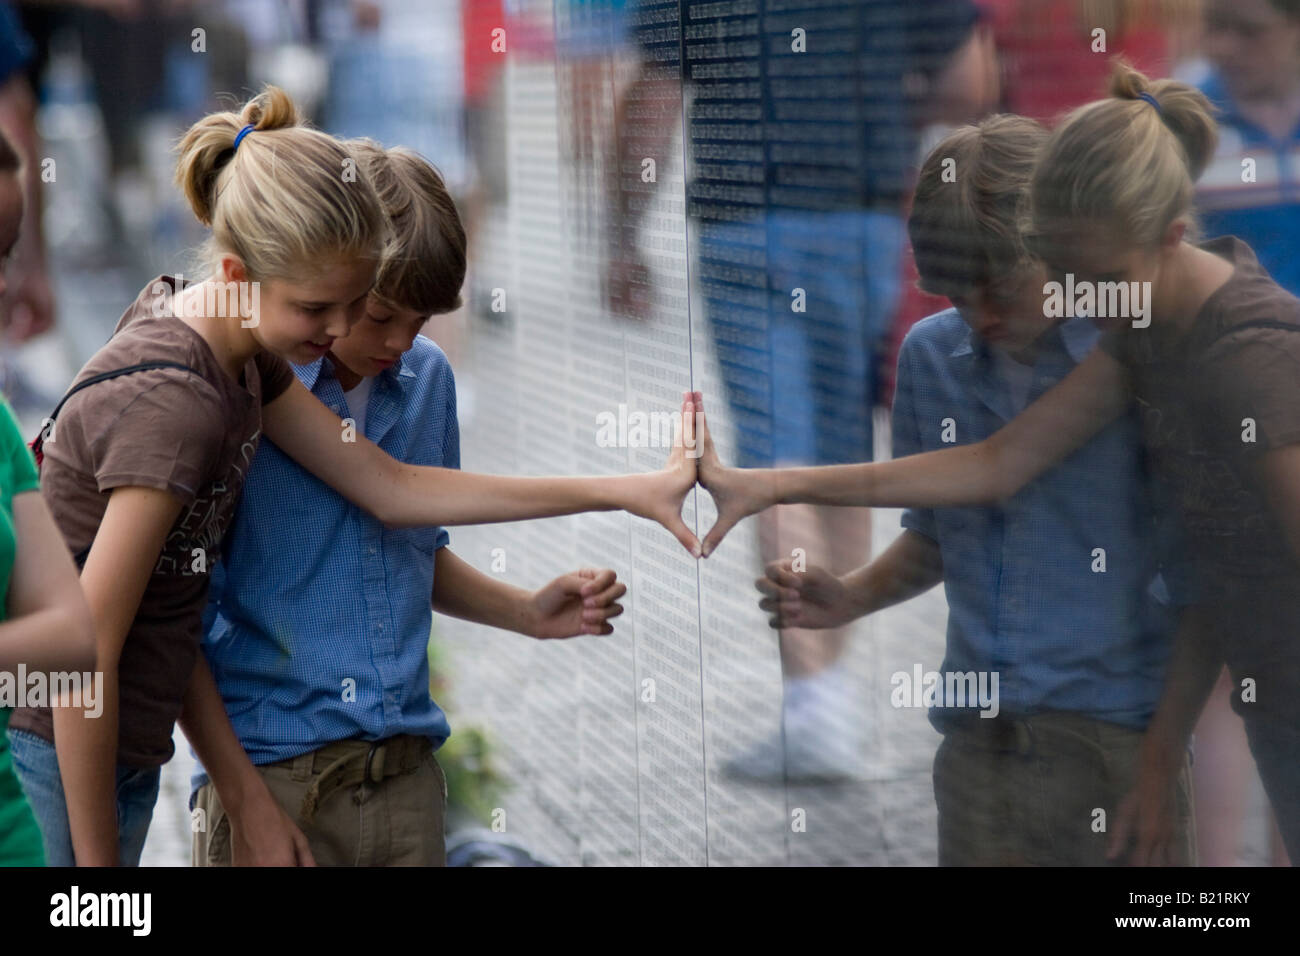 Children touch and examine the Vietnam War Memorial in Washington D C on June 13th 2006 Stock Photo